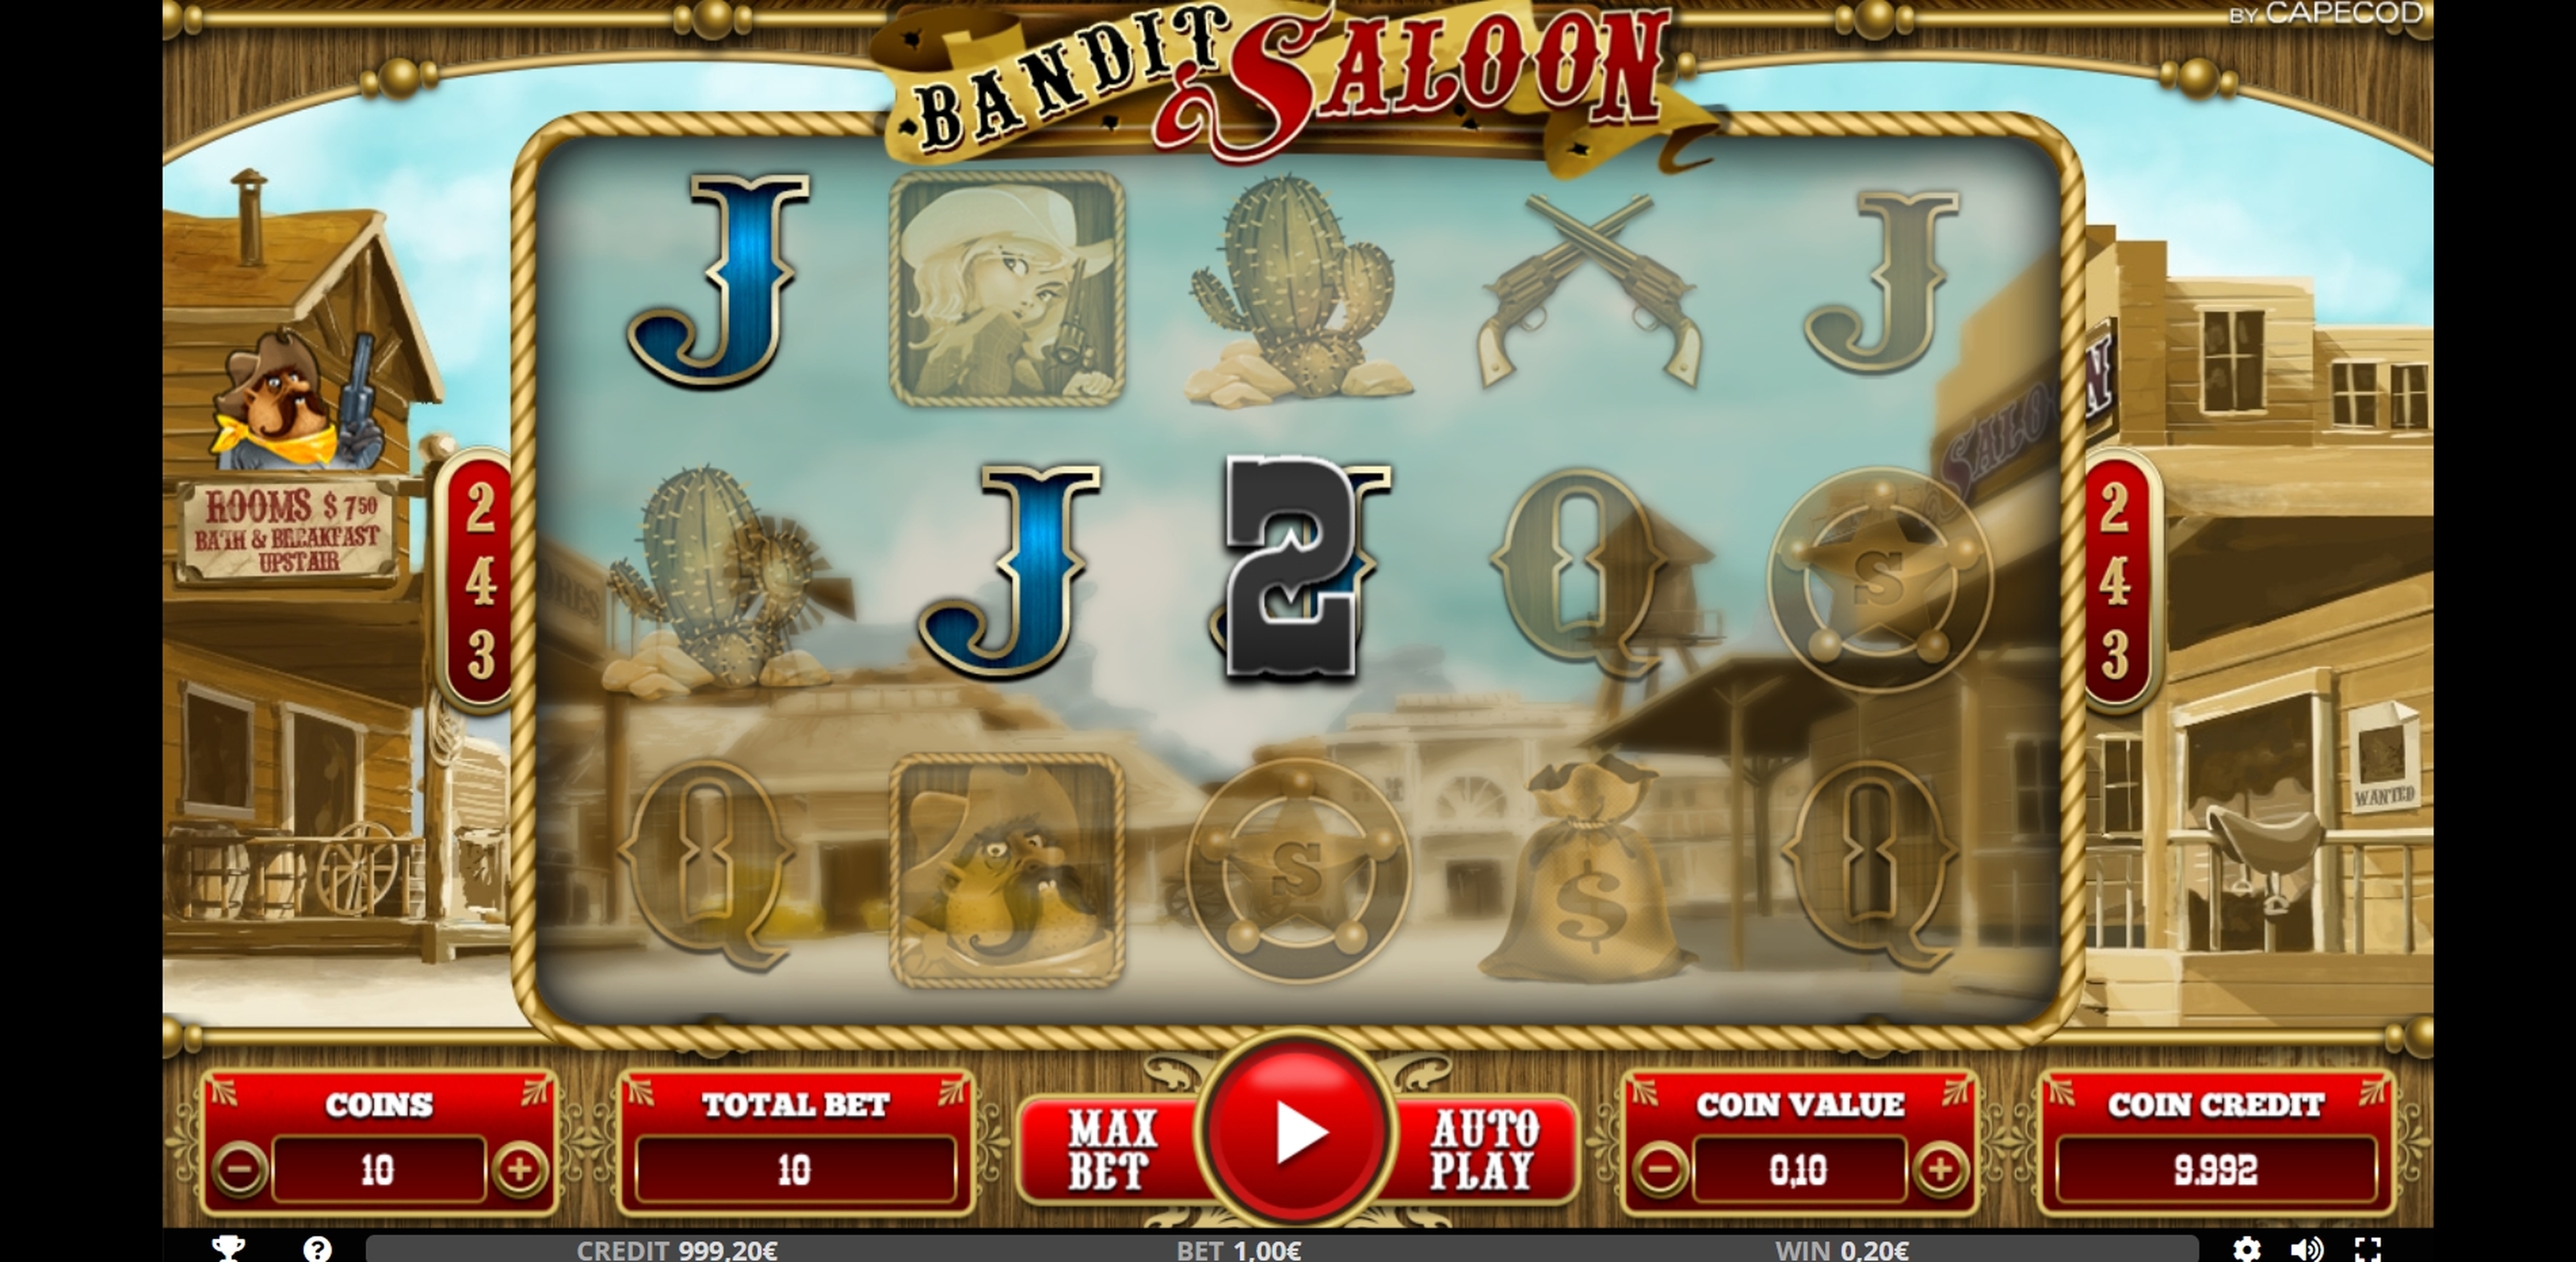 Win Money in Bandit Saloon Free Slot Game by Capecod Gaming